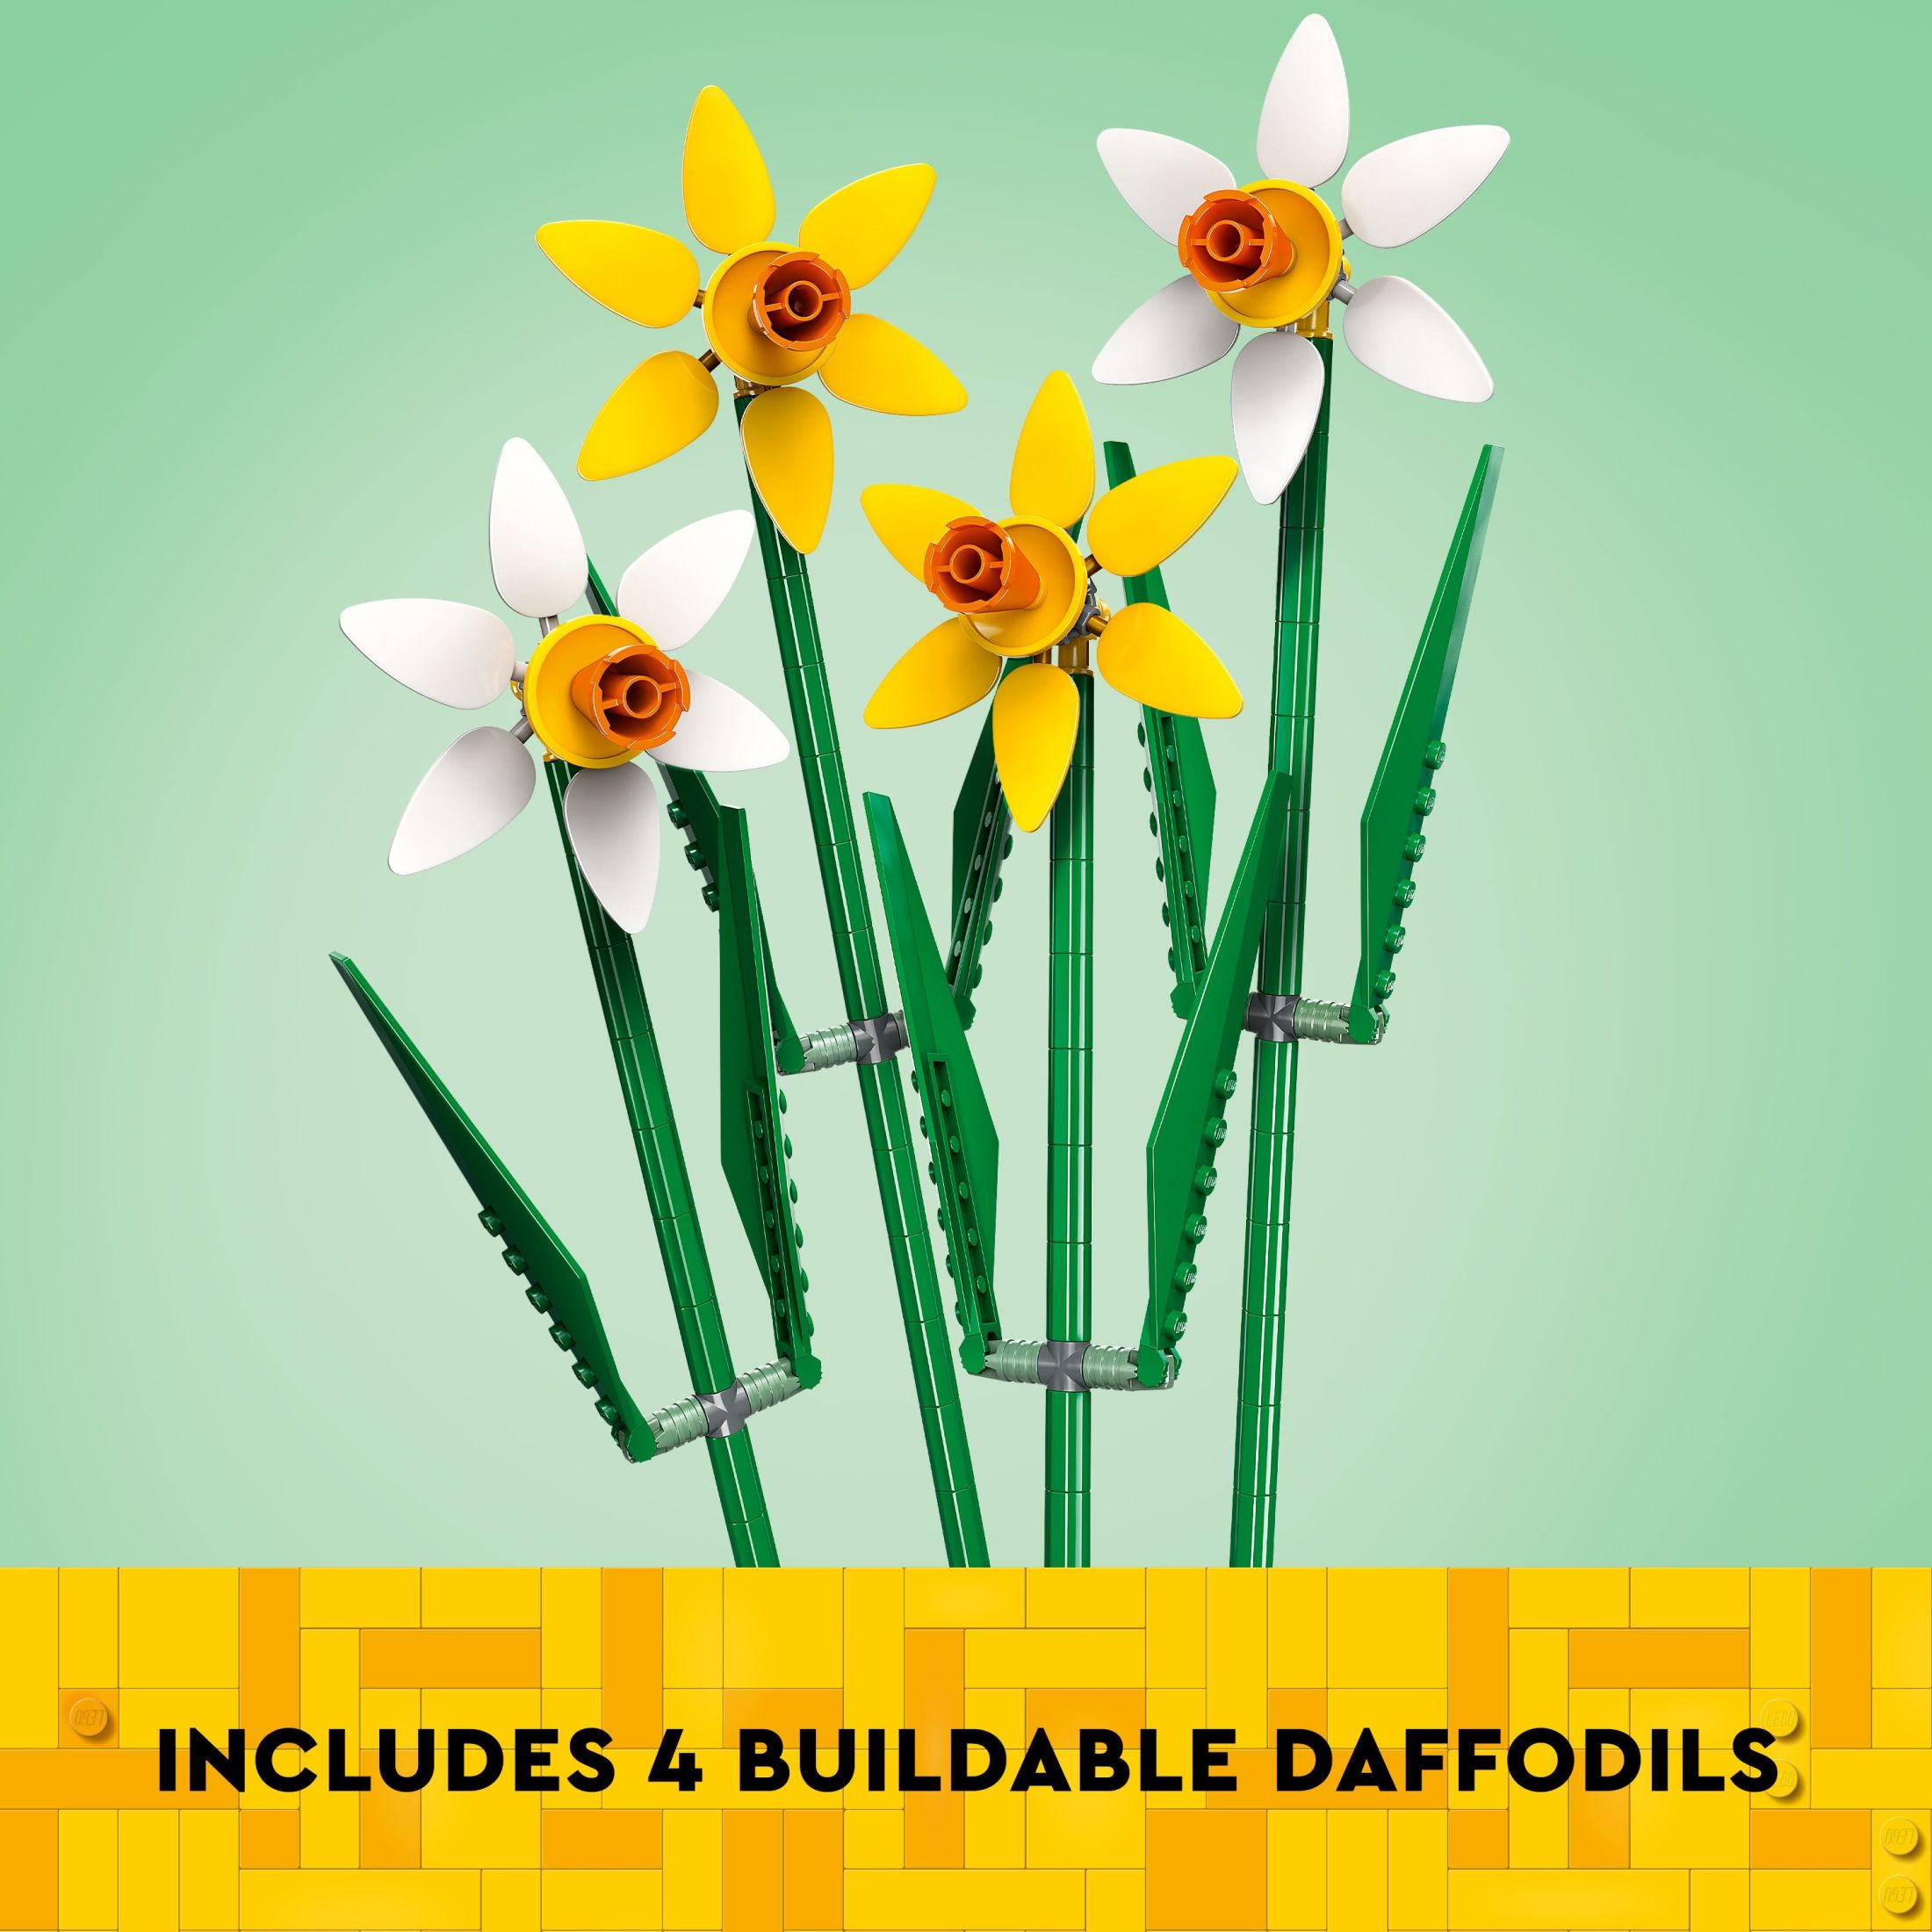 LEGO Daffodils Celebration Gift, Yellow and White Daffodils, Spring Flower Room Decor, Great Gift for Flower Lovers, 40747 - image 5 of 8